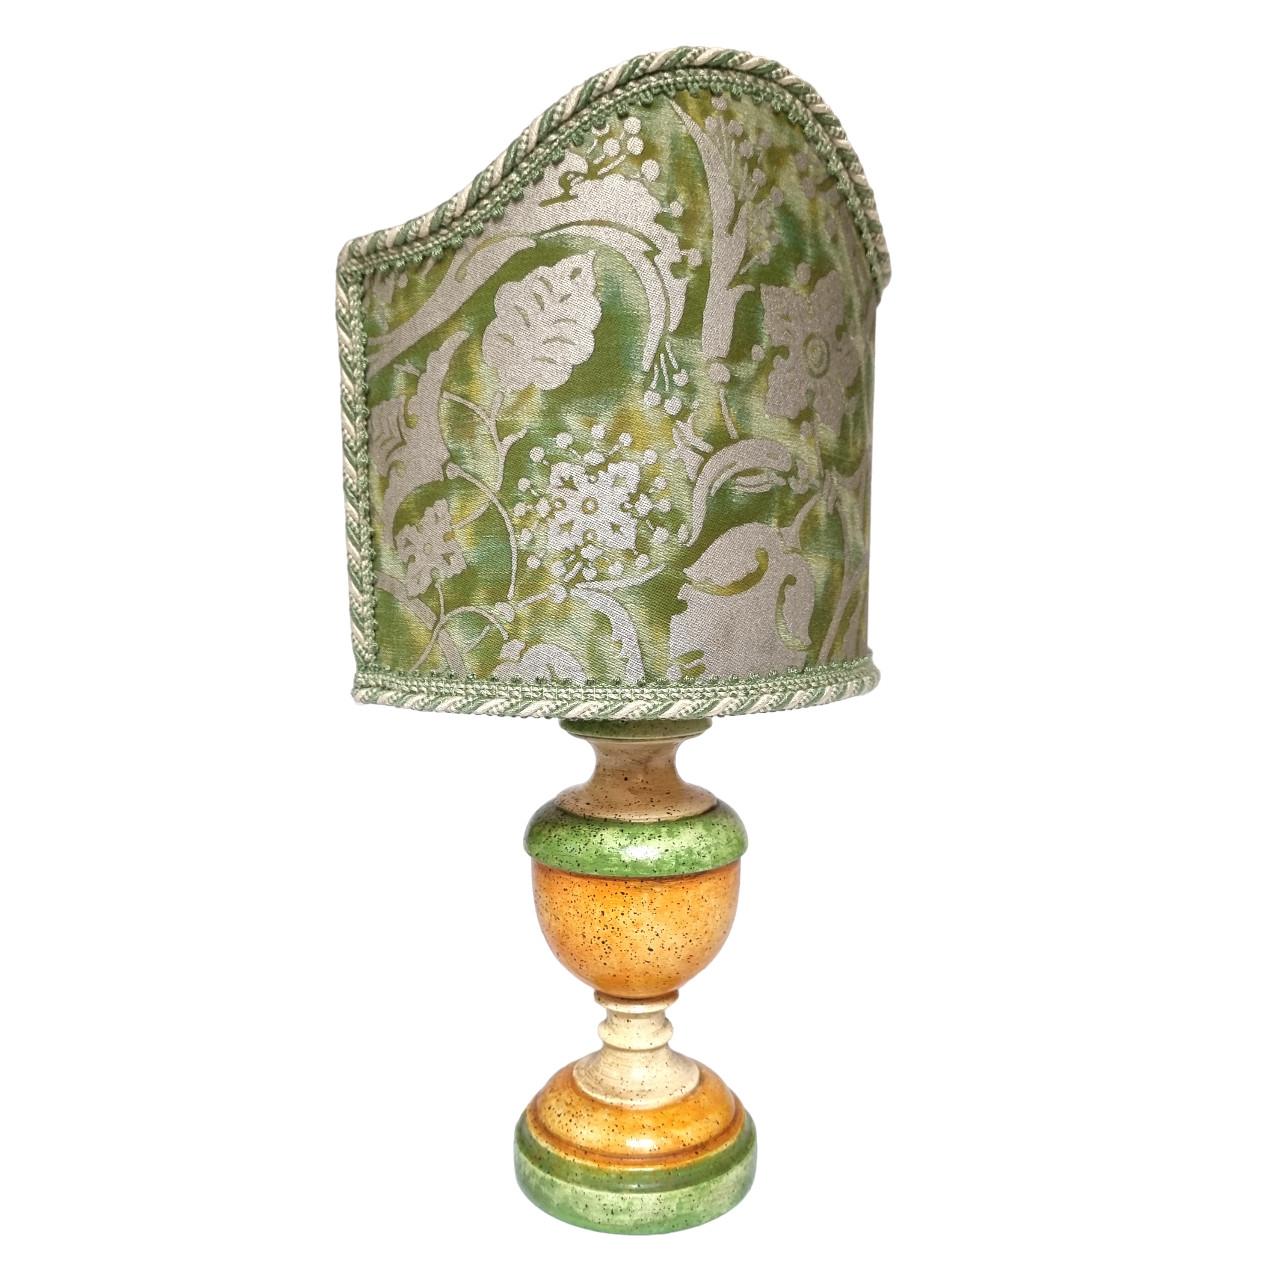 This is an absolutely fabulous pair of green, orange and ivory lacquered turned wood table lamps on a round base, handcrafted in Tuscany (Italy) and finished with antique patina.
The lampshade is new, handcrafted using Fortuny fabric Persepolis